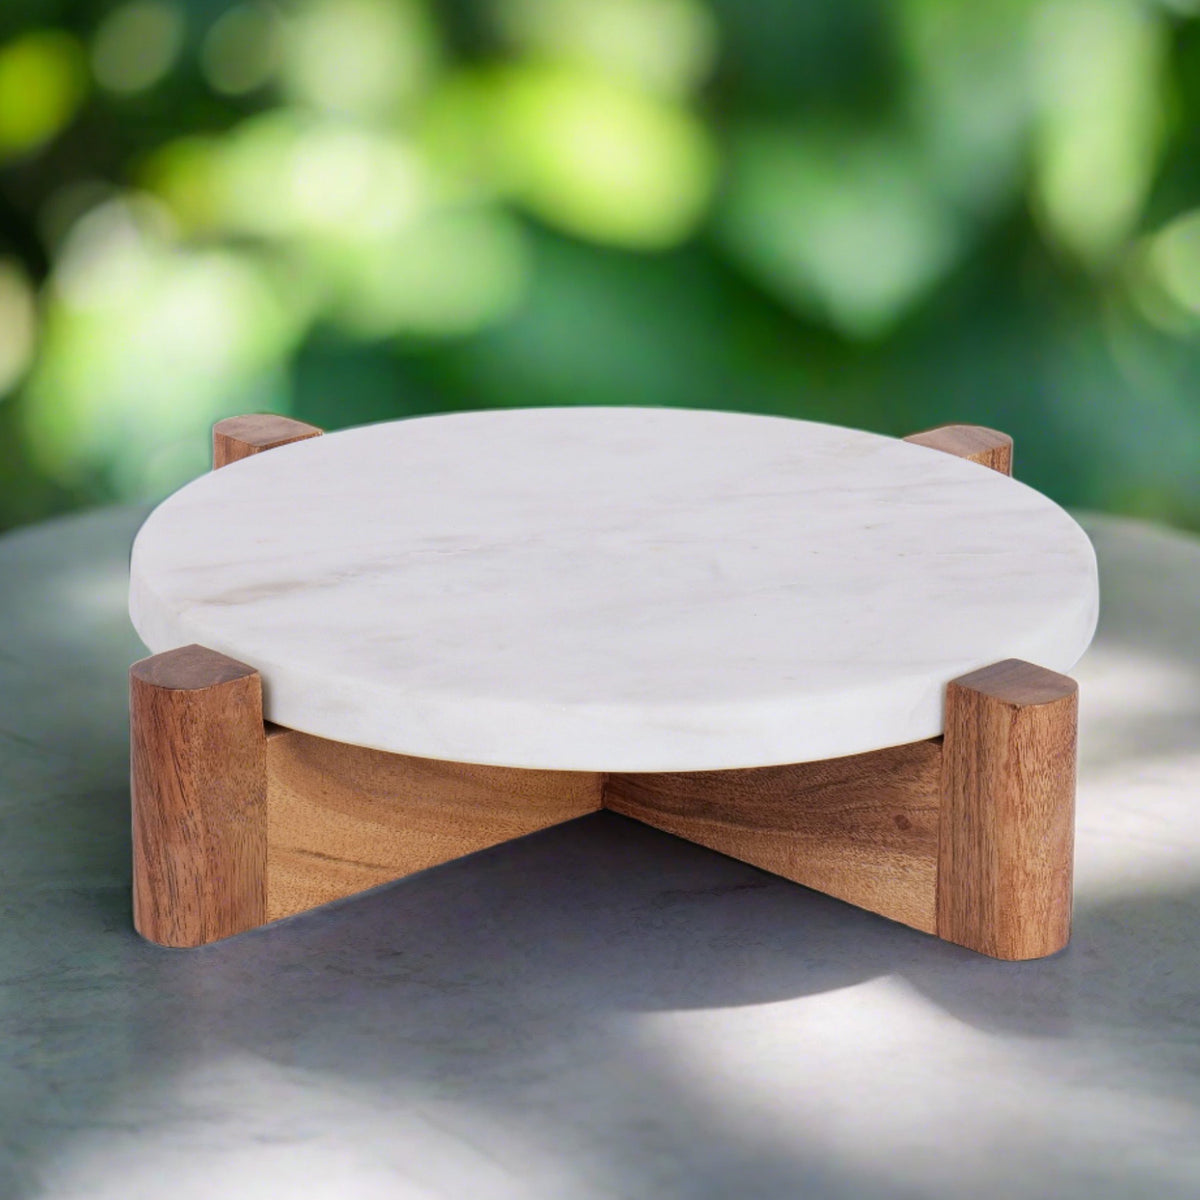 White marble cake stand with wooden base